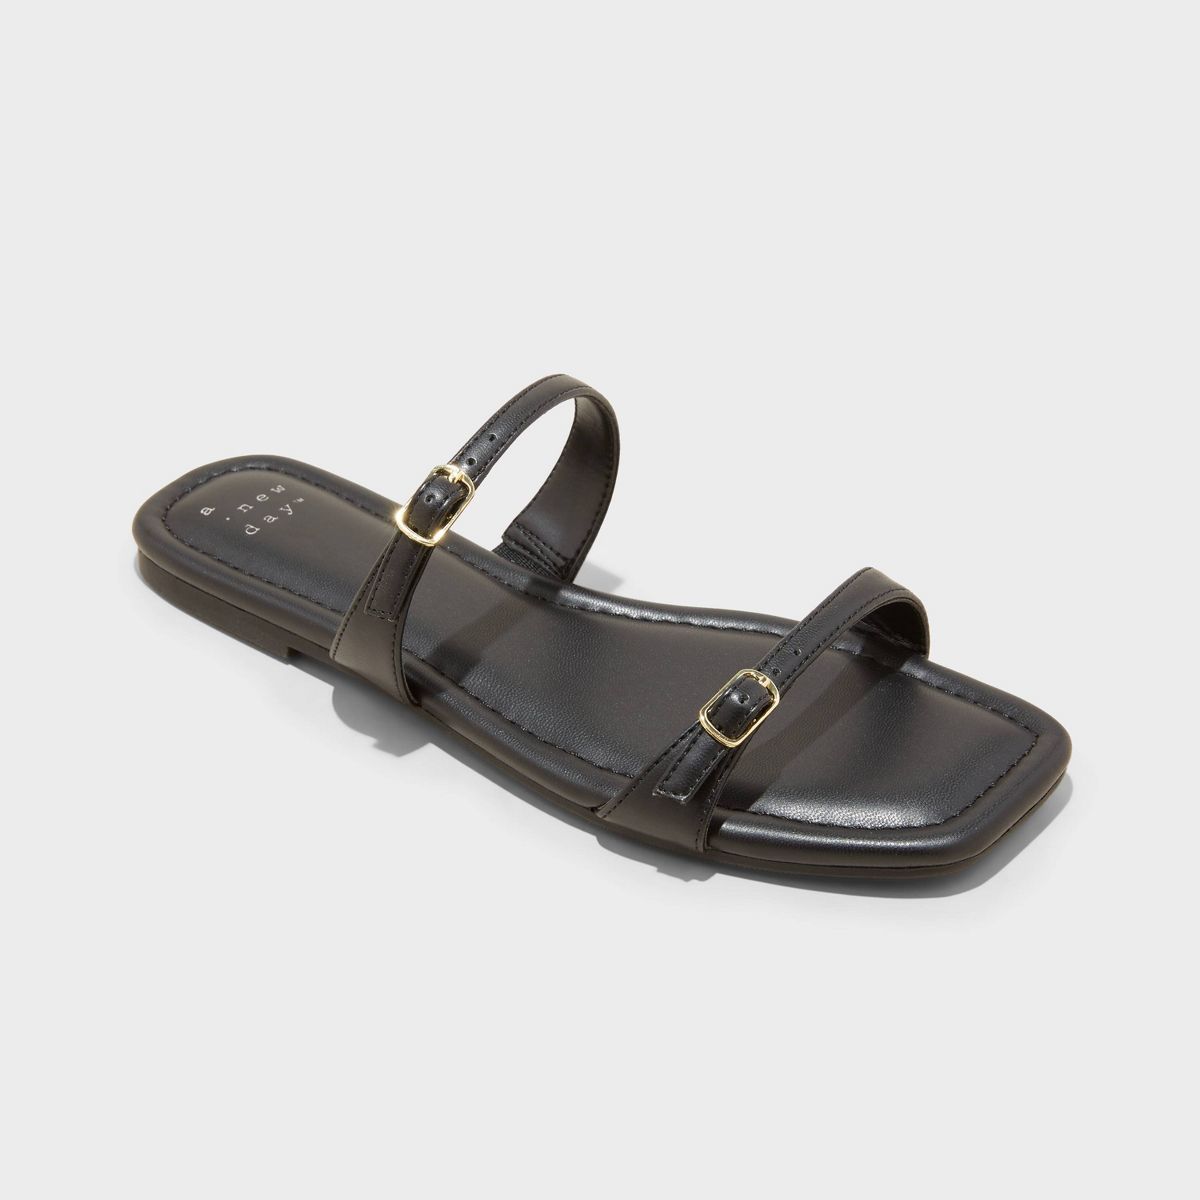 Women's Connie Two Band Buckle Slide Sandals with Memory Foam Insole - A New Day™ Black 8.5 | Target